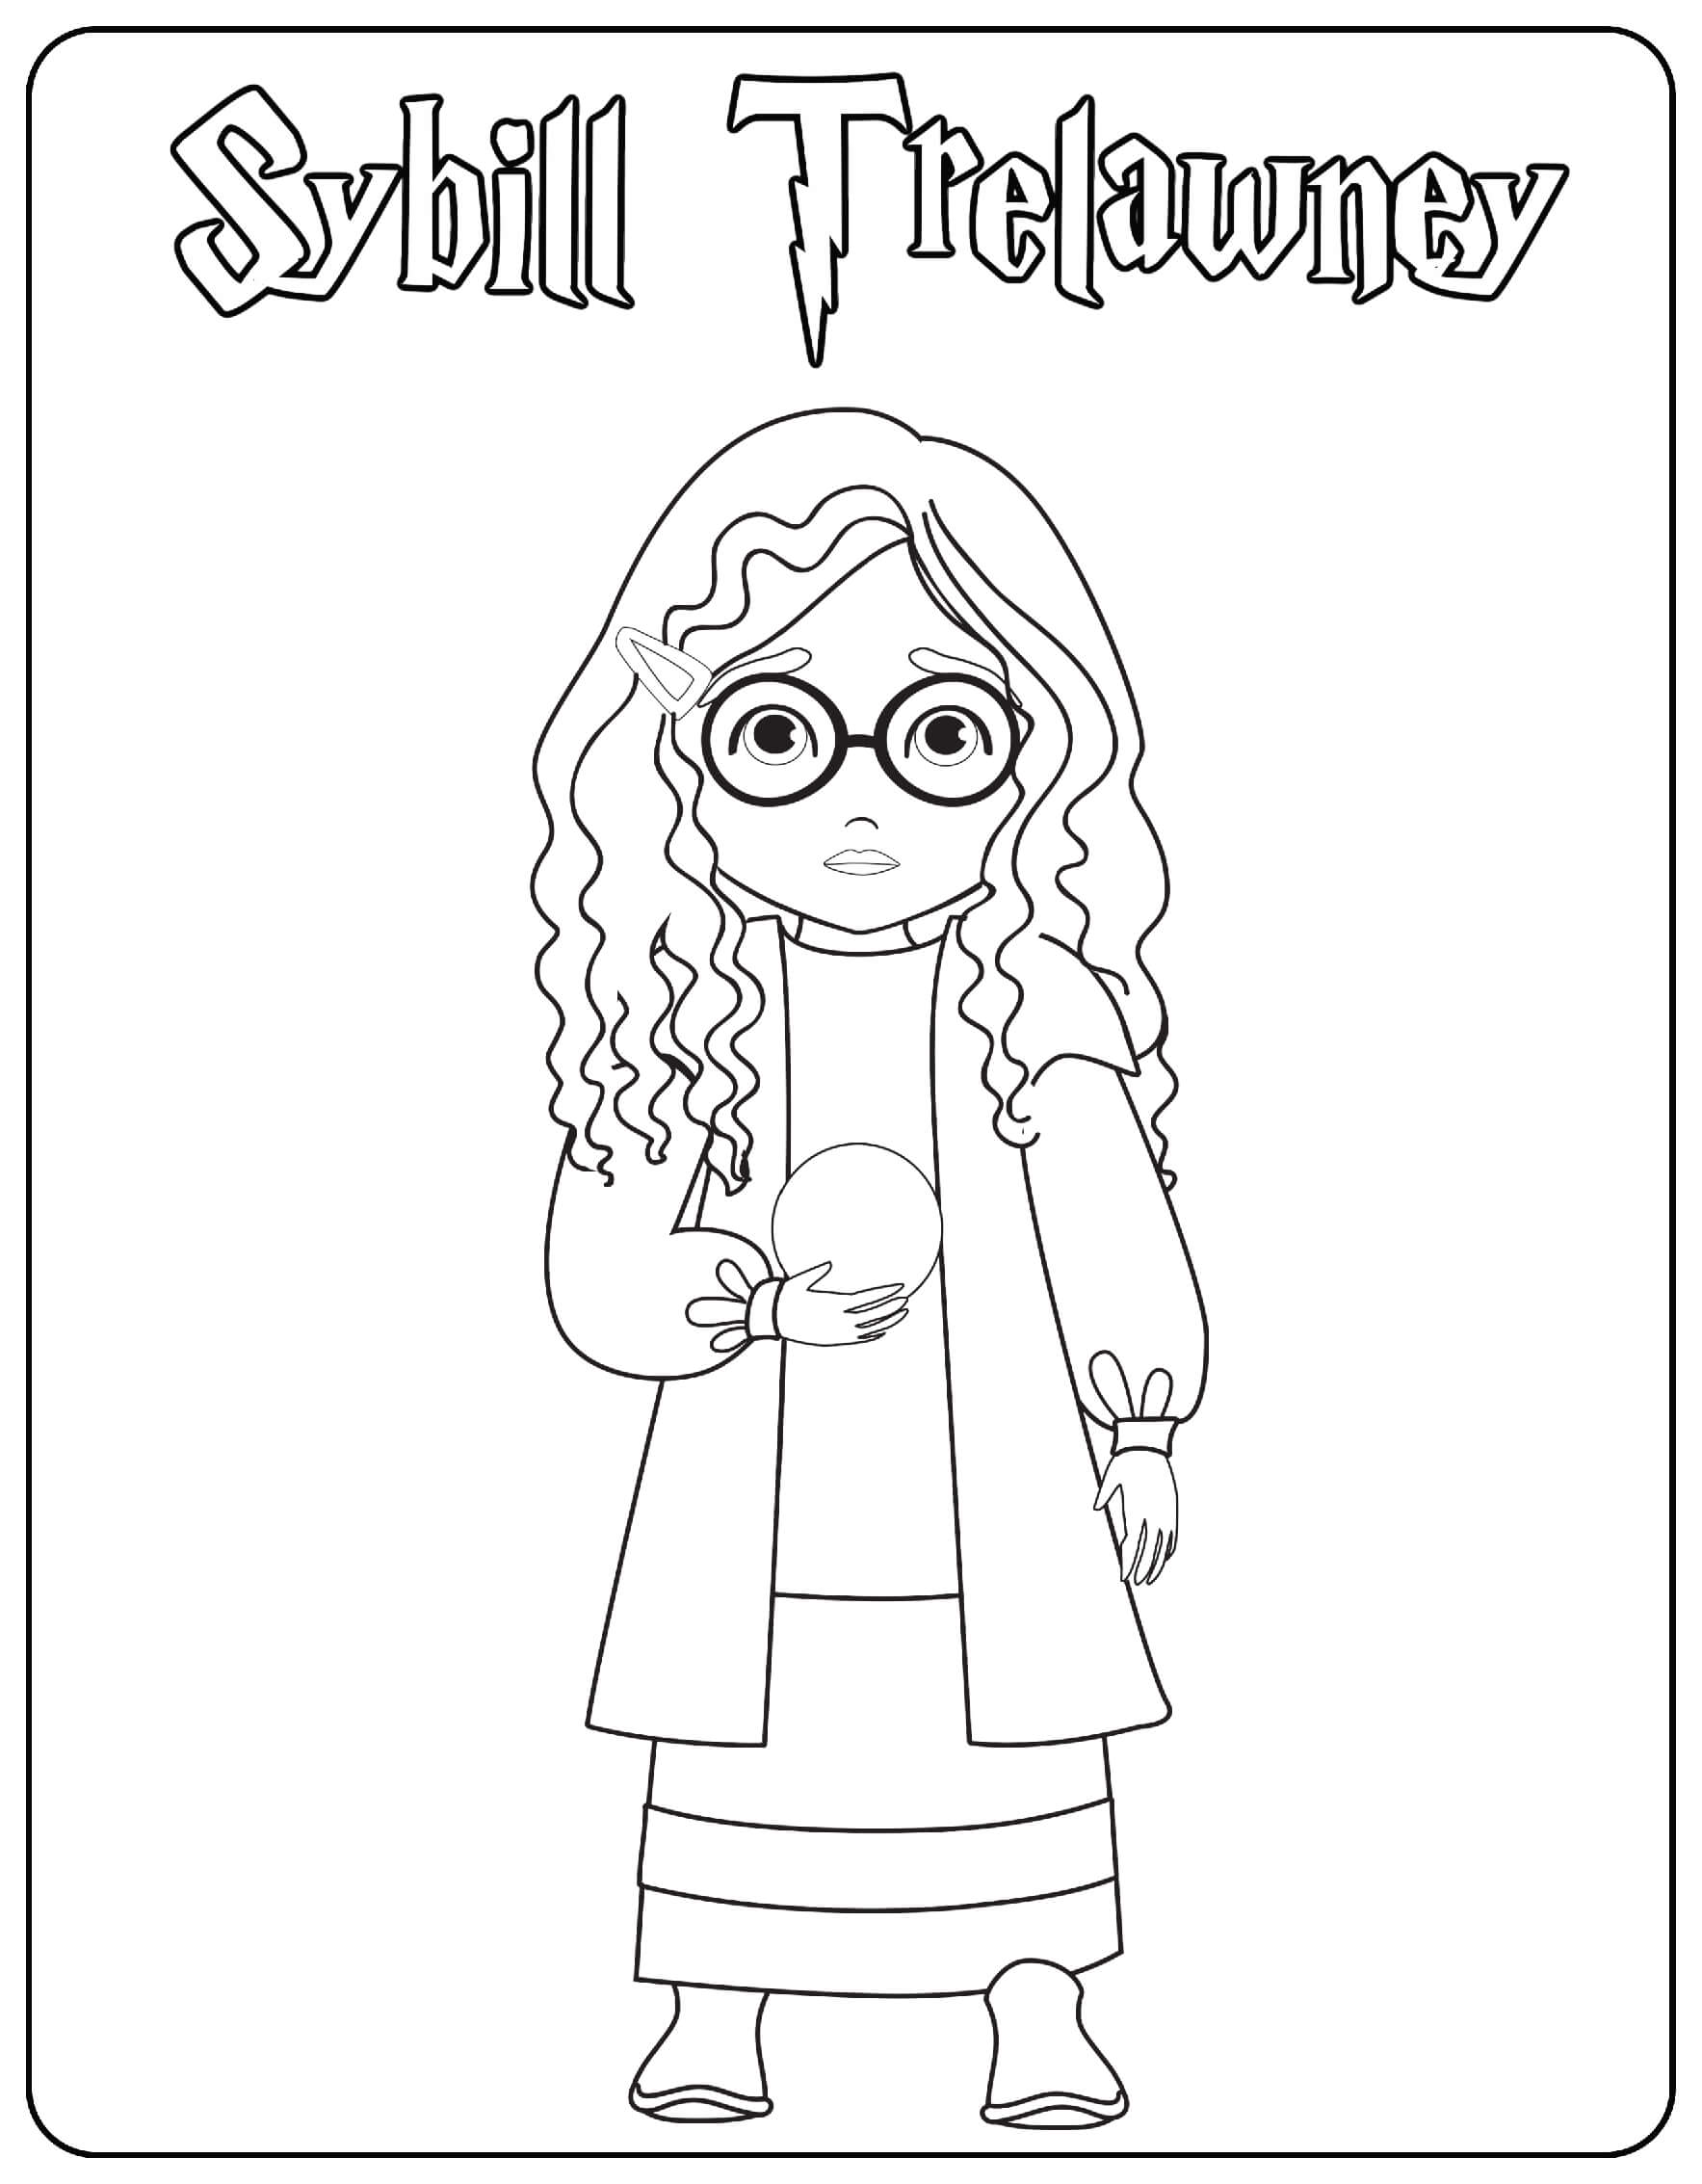 Sybill Trelawney Coloring Page